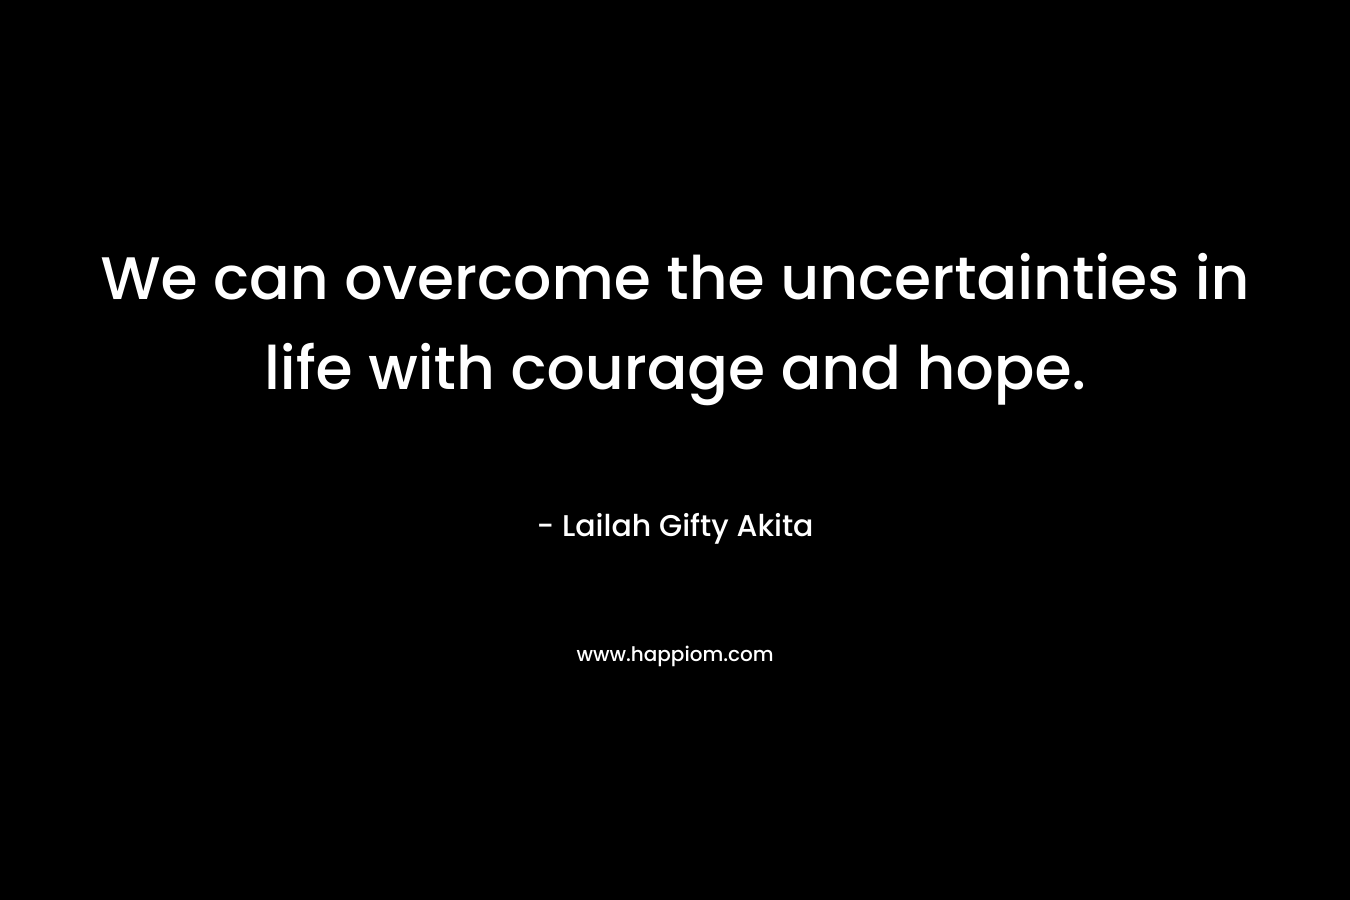 We can overcome the uncertainties in life with courage and hope.